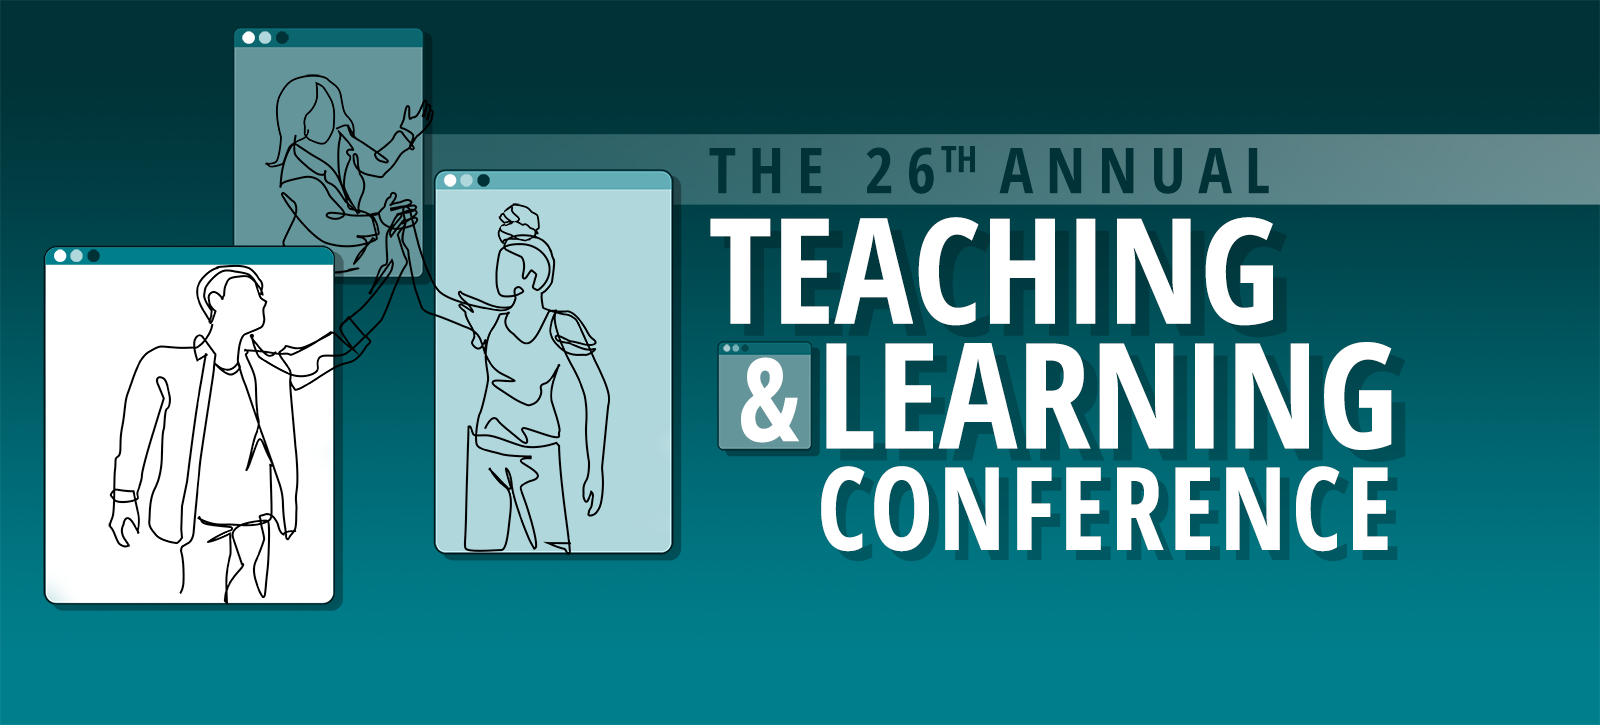 The 26th Annual Teaching and Learning Conference